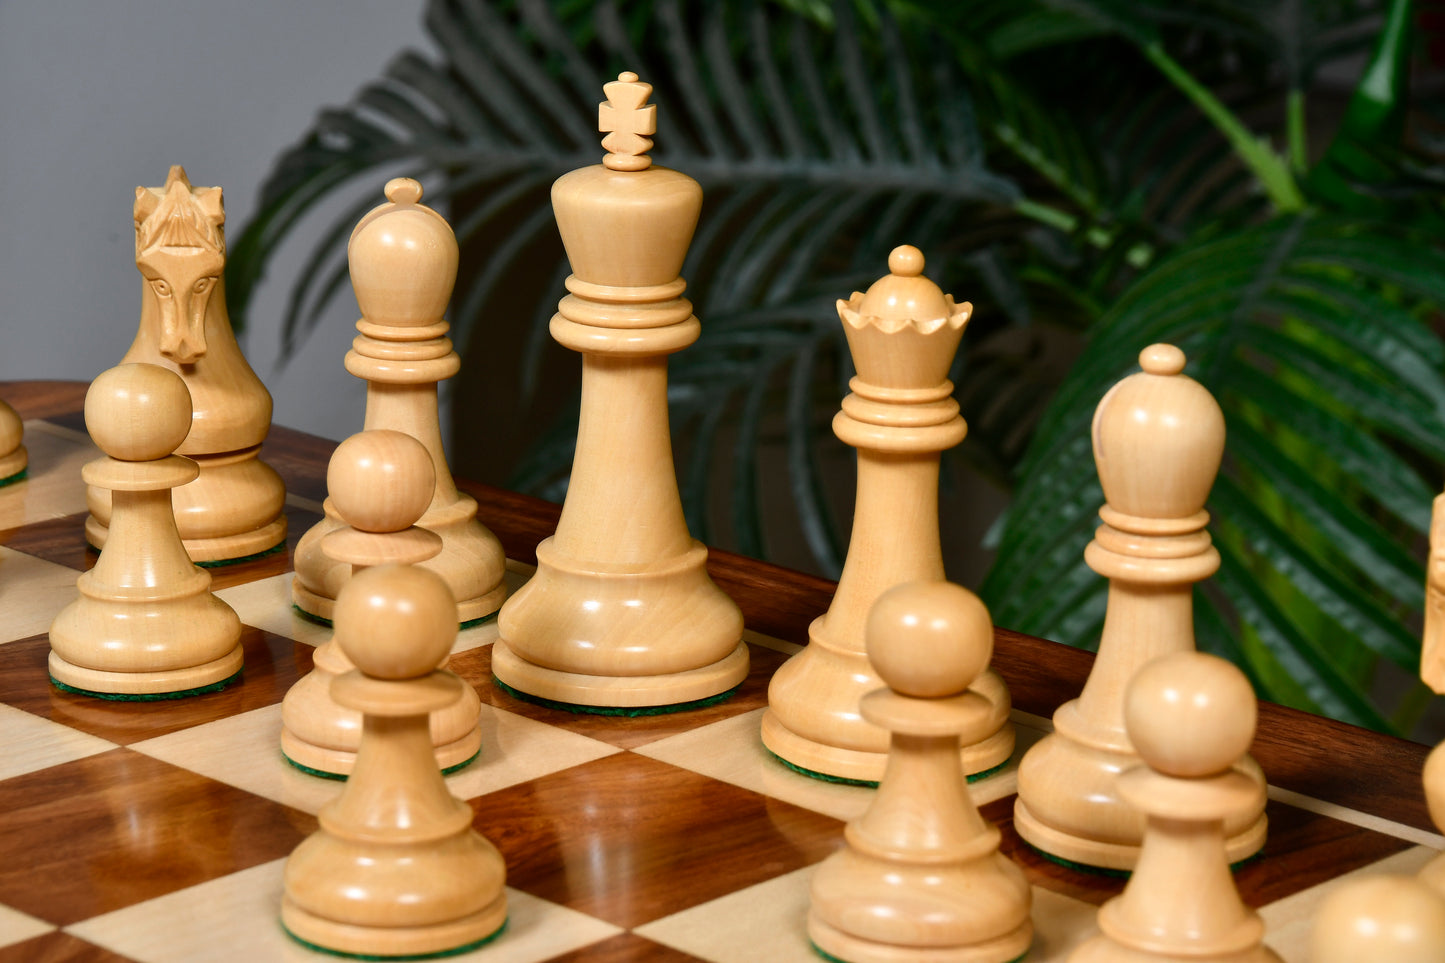 The Leningrad Club-Sized Wooden Chess Pieces in Sheesham Wood (Golden Rosewood) & Boxwood- 4.0" King